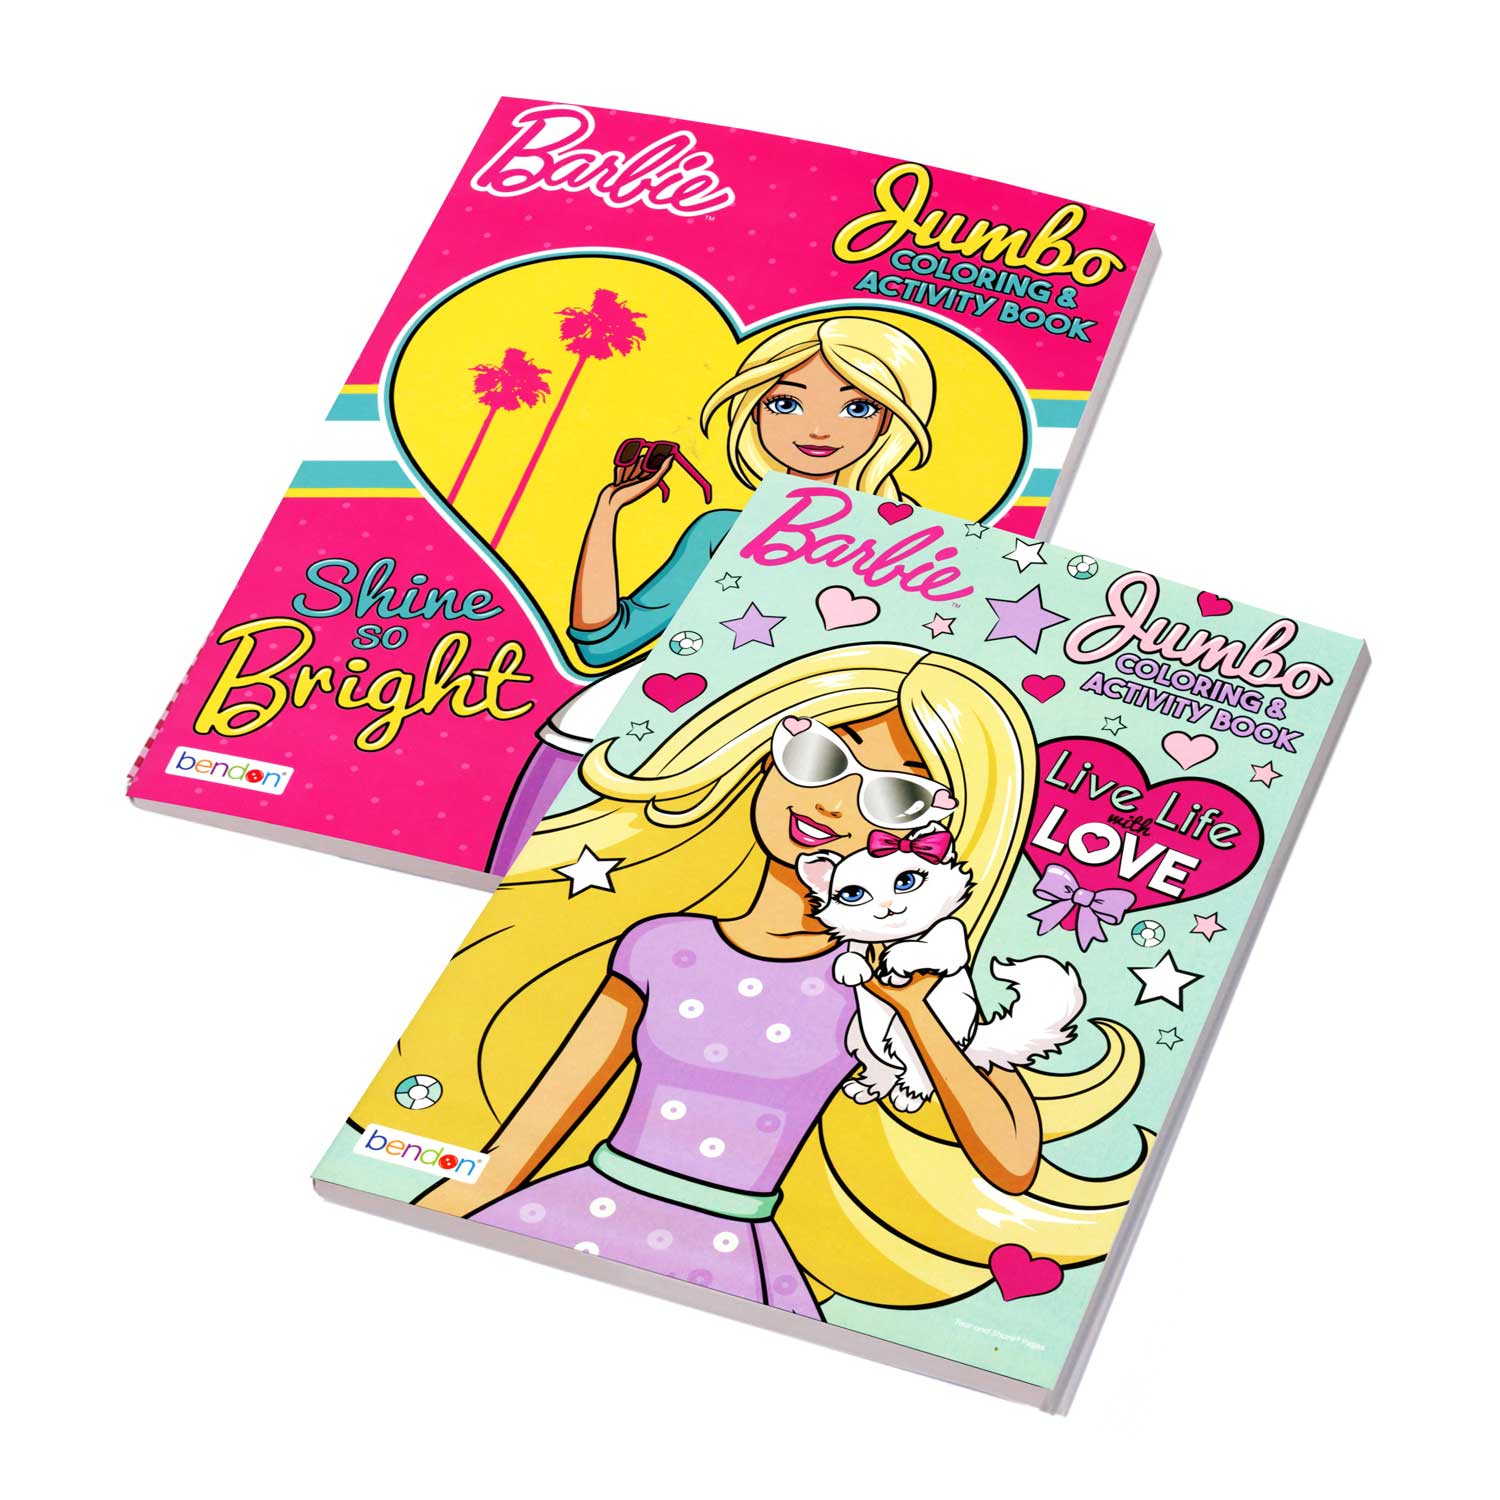 Barbie Coloring Book - 1-Title - 3-Packs - 12-Pack - G8 Central